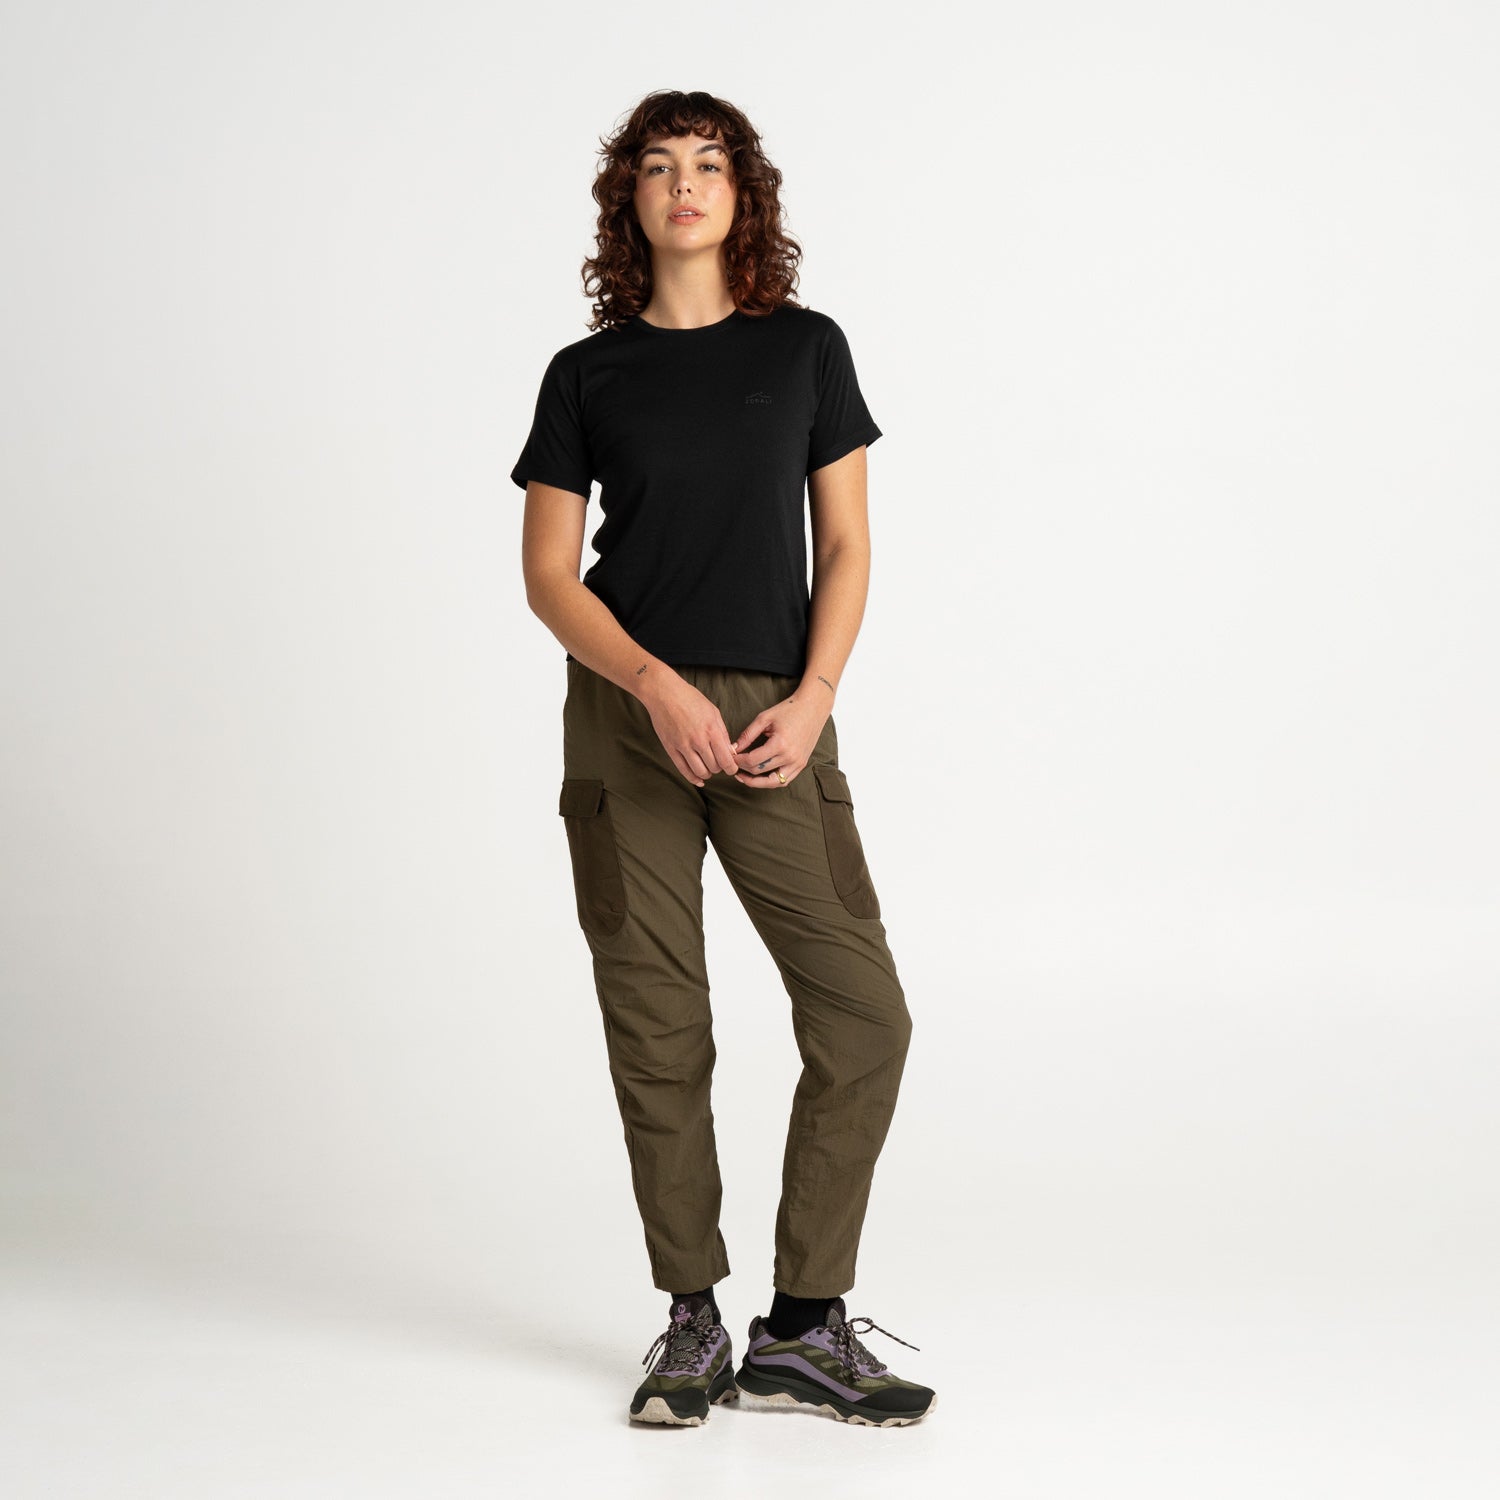 Womens Recycled Venture Pants Olive